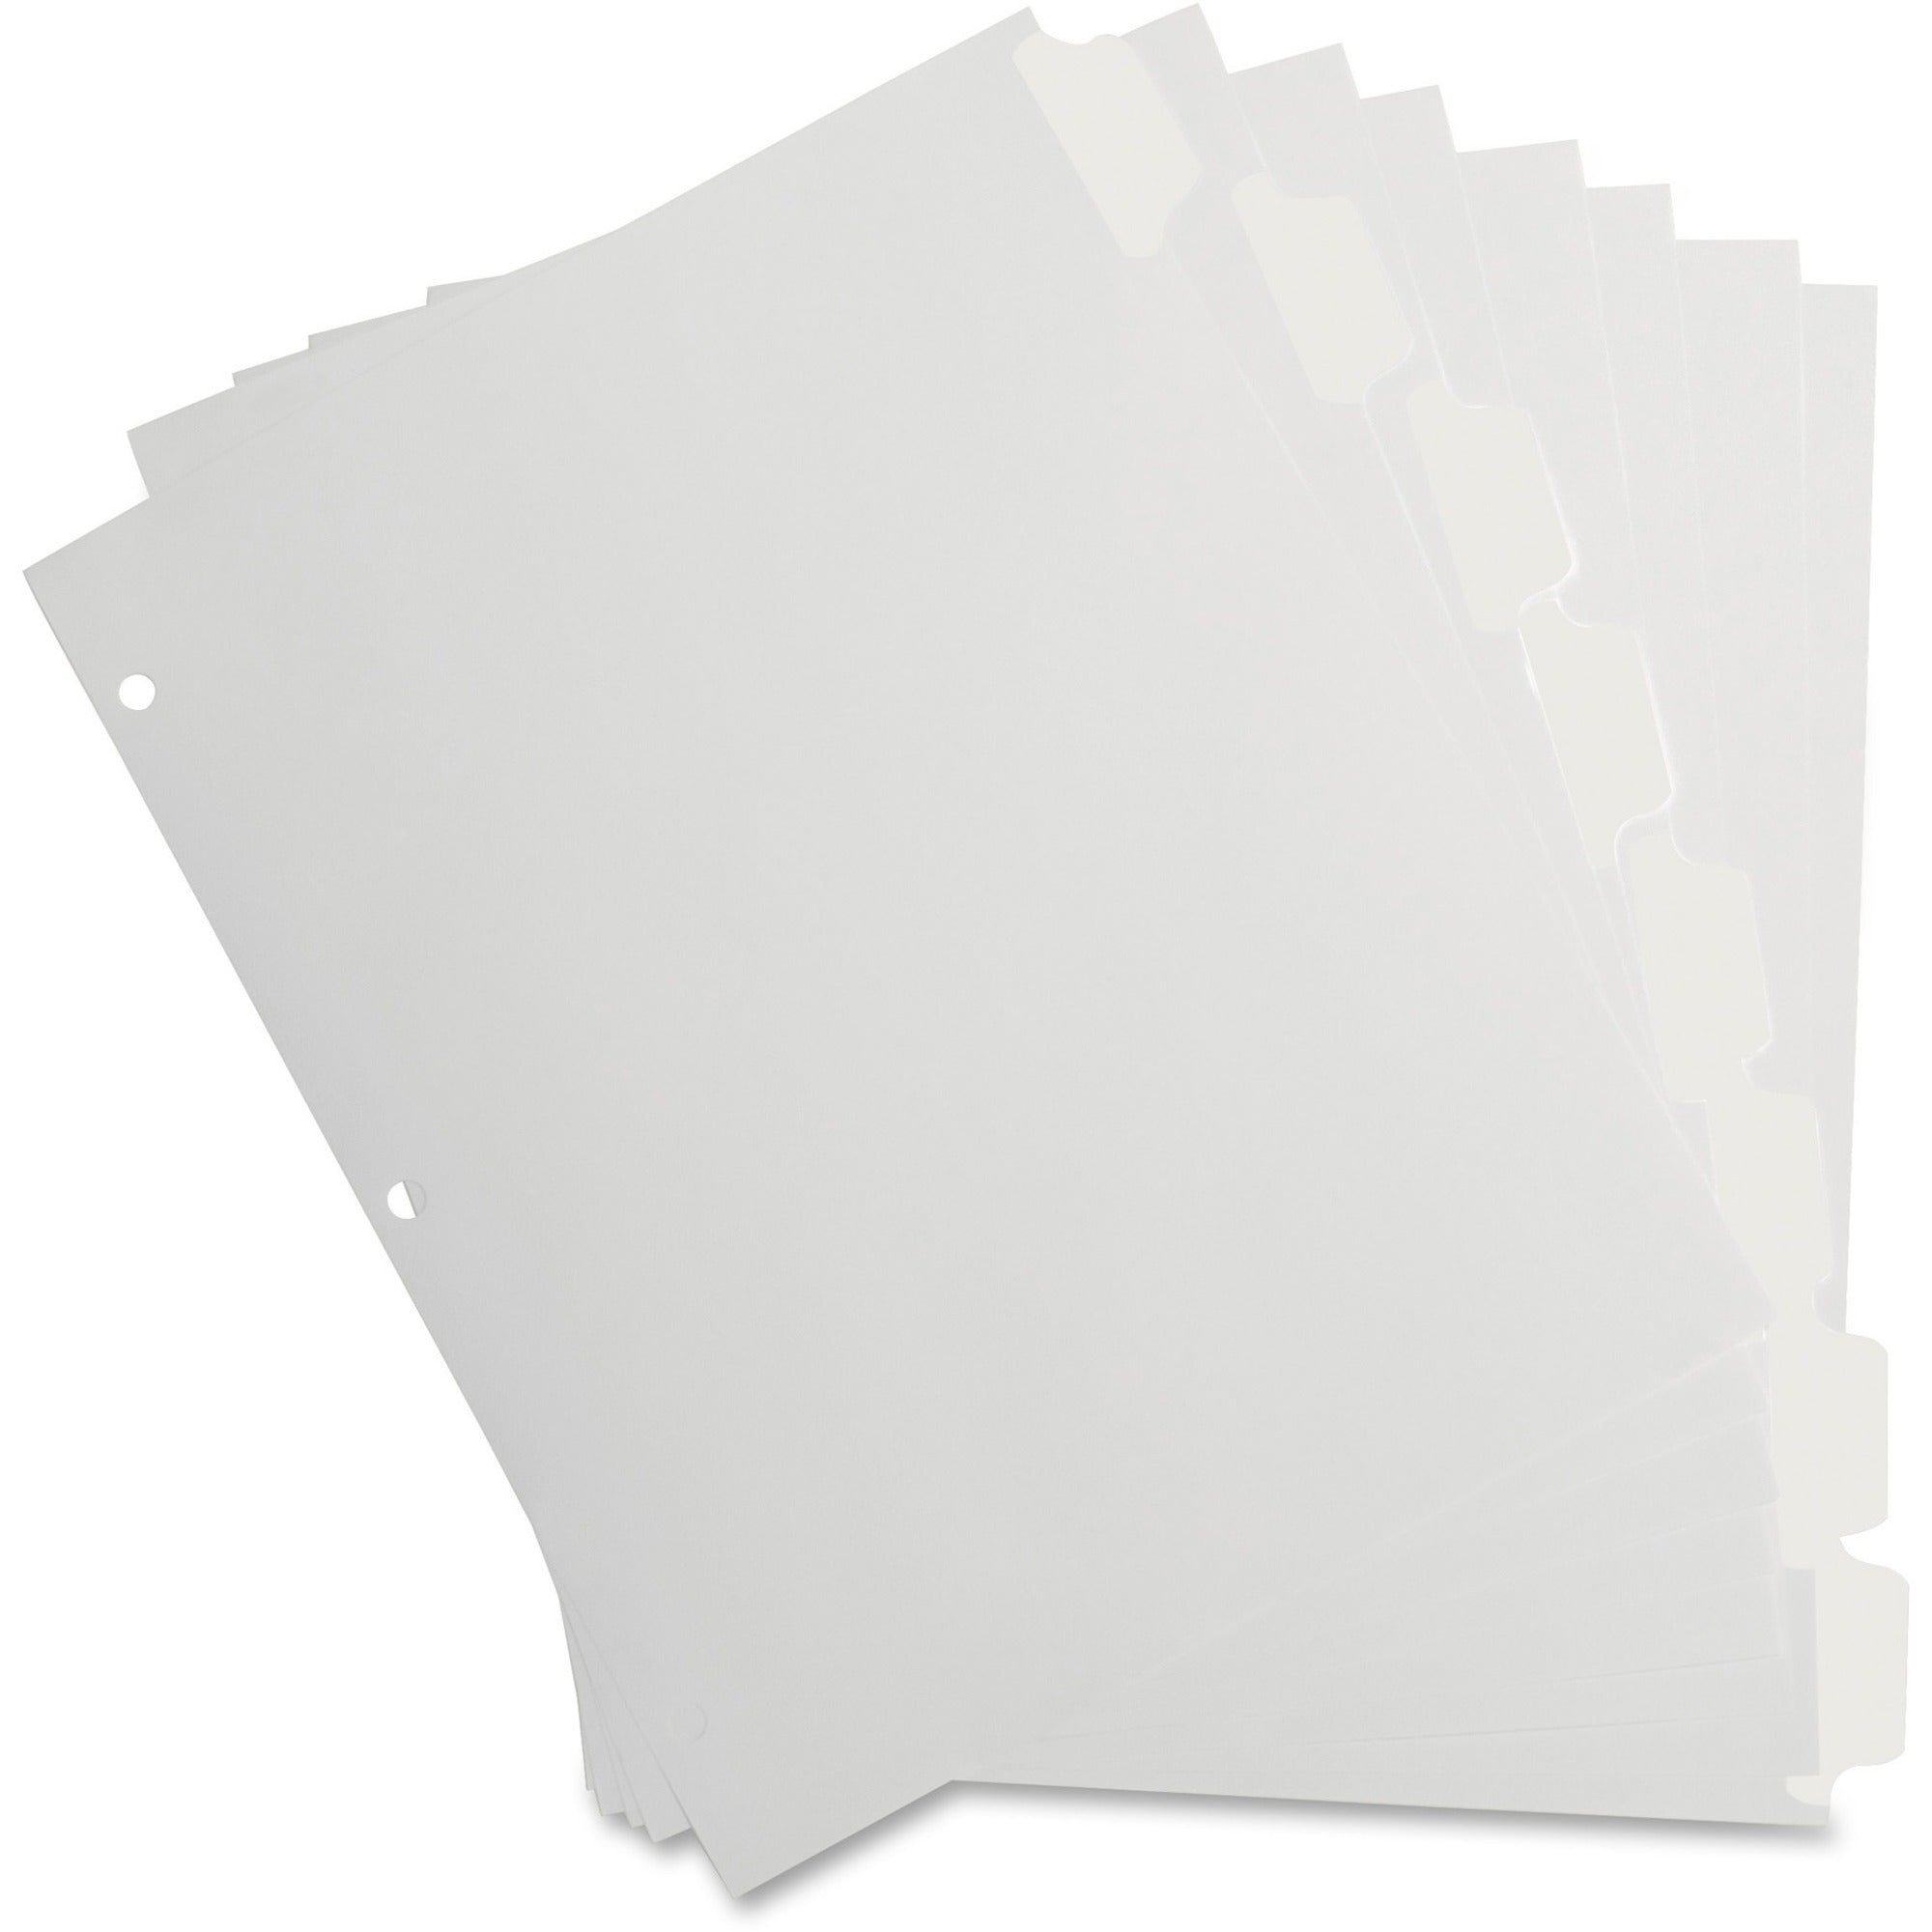 Business Source 3-Ring 8-Tab Indexes - 8 Write-on Tab(s)1.25" Tab Width - 8.5" Divider Width x 11" Divider Length - Letter - 3 Hole Punched - White Divider - White Mylar Tab(s) - Recycled - Reinforced Edges, Punched - 8 / Set - 